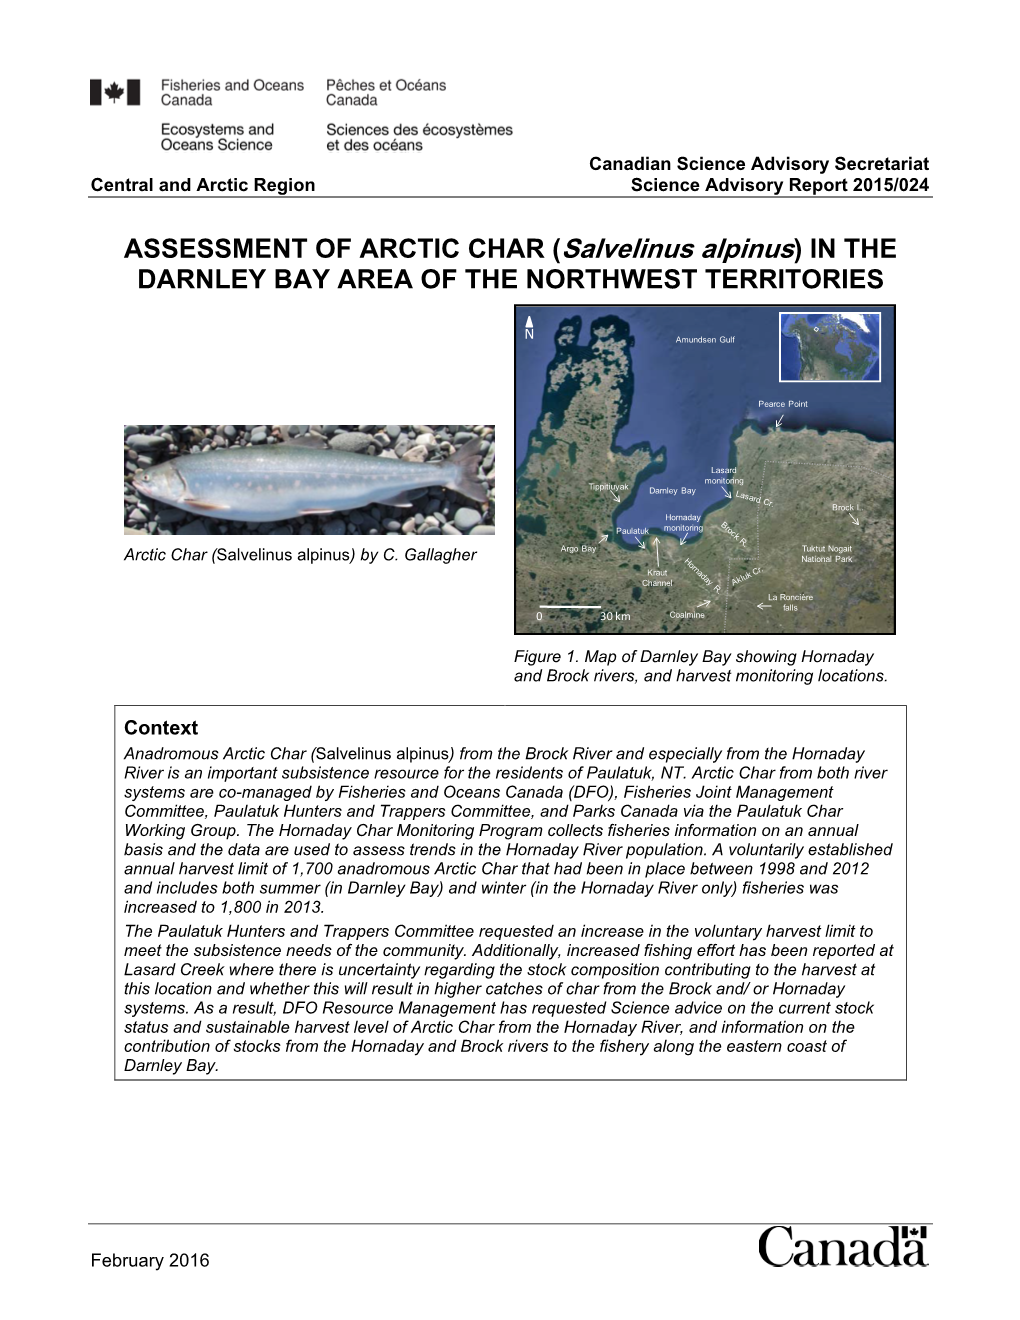 ASSESSMENT of ARCTIC CHAR (Salvelinus Alpinus) in the DARNLEY BAY AREA of the NORTHWEST TERRITORIES